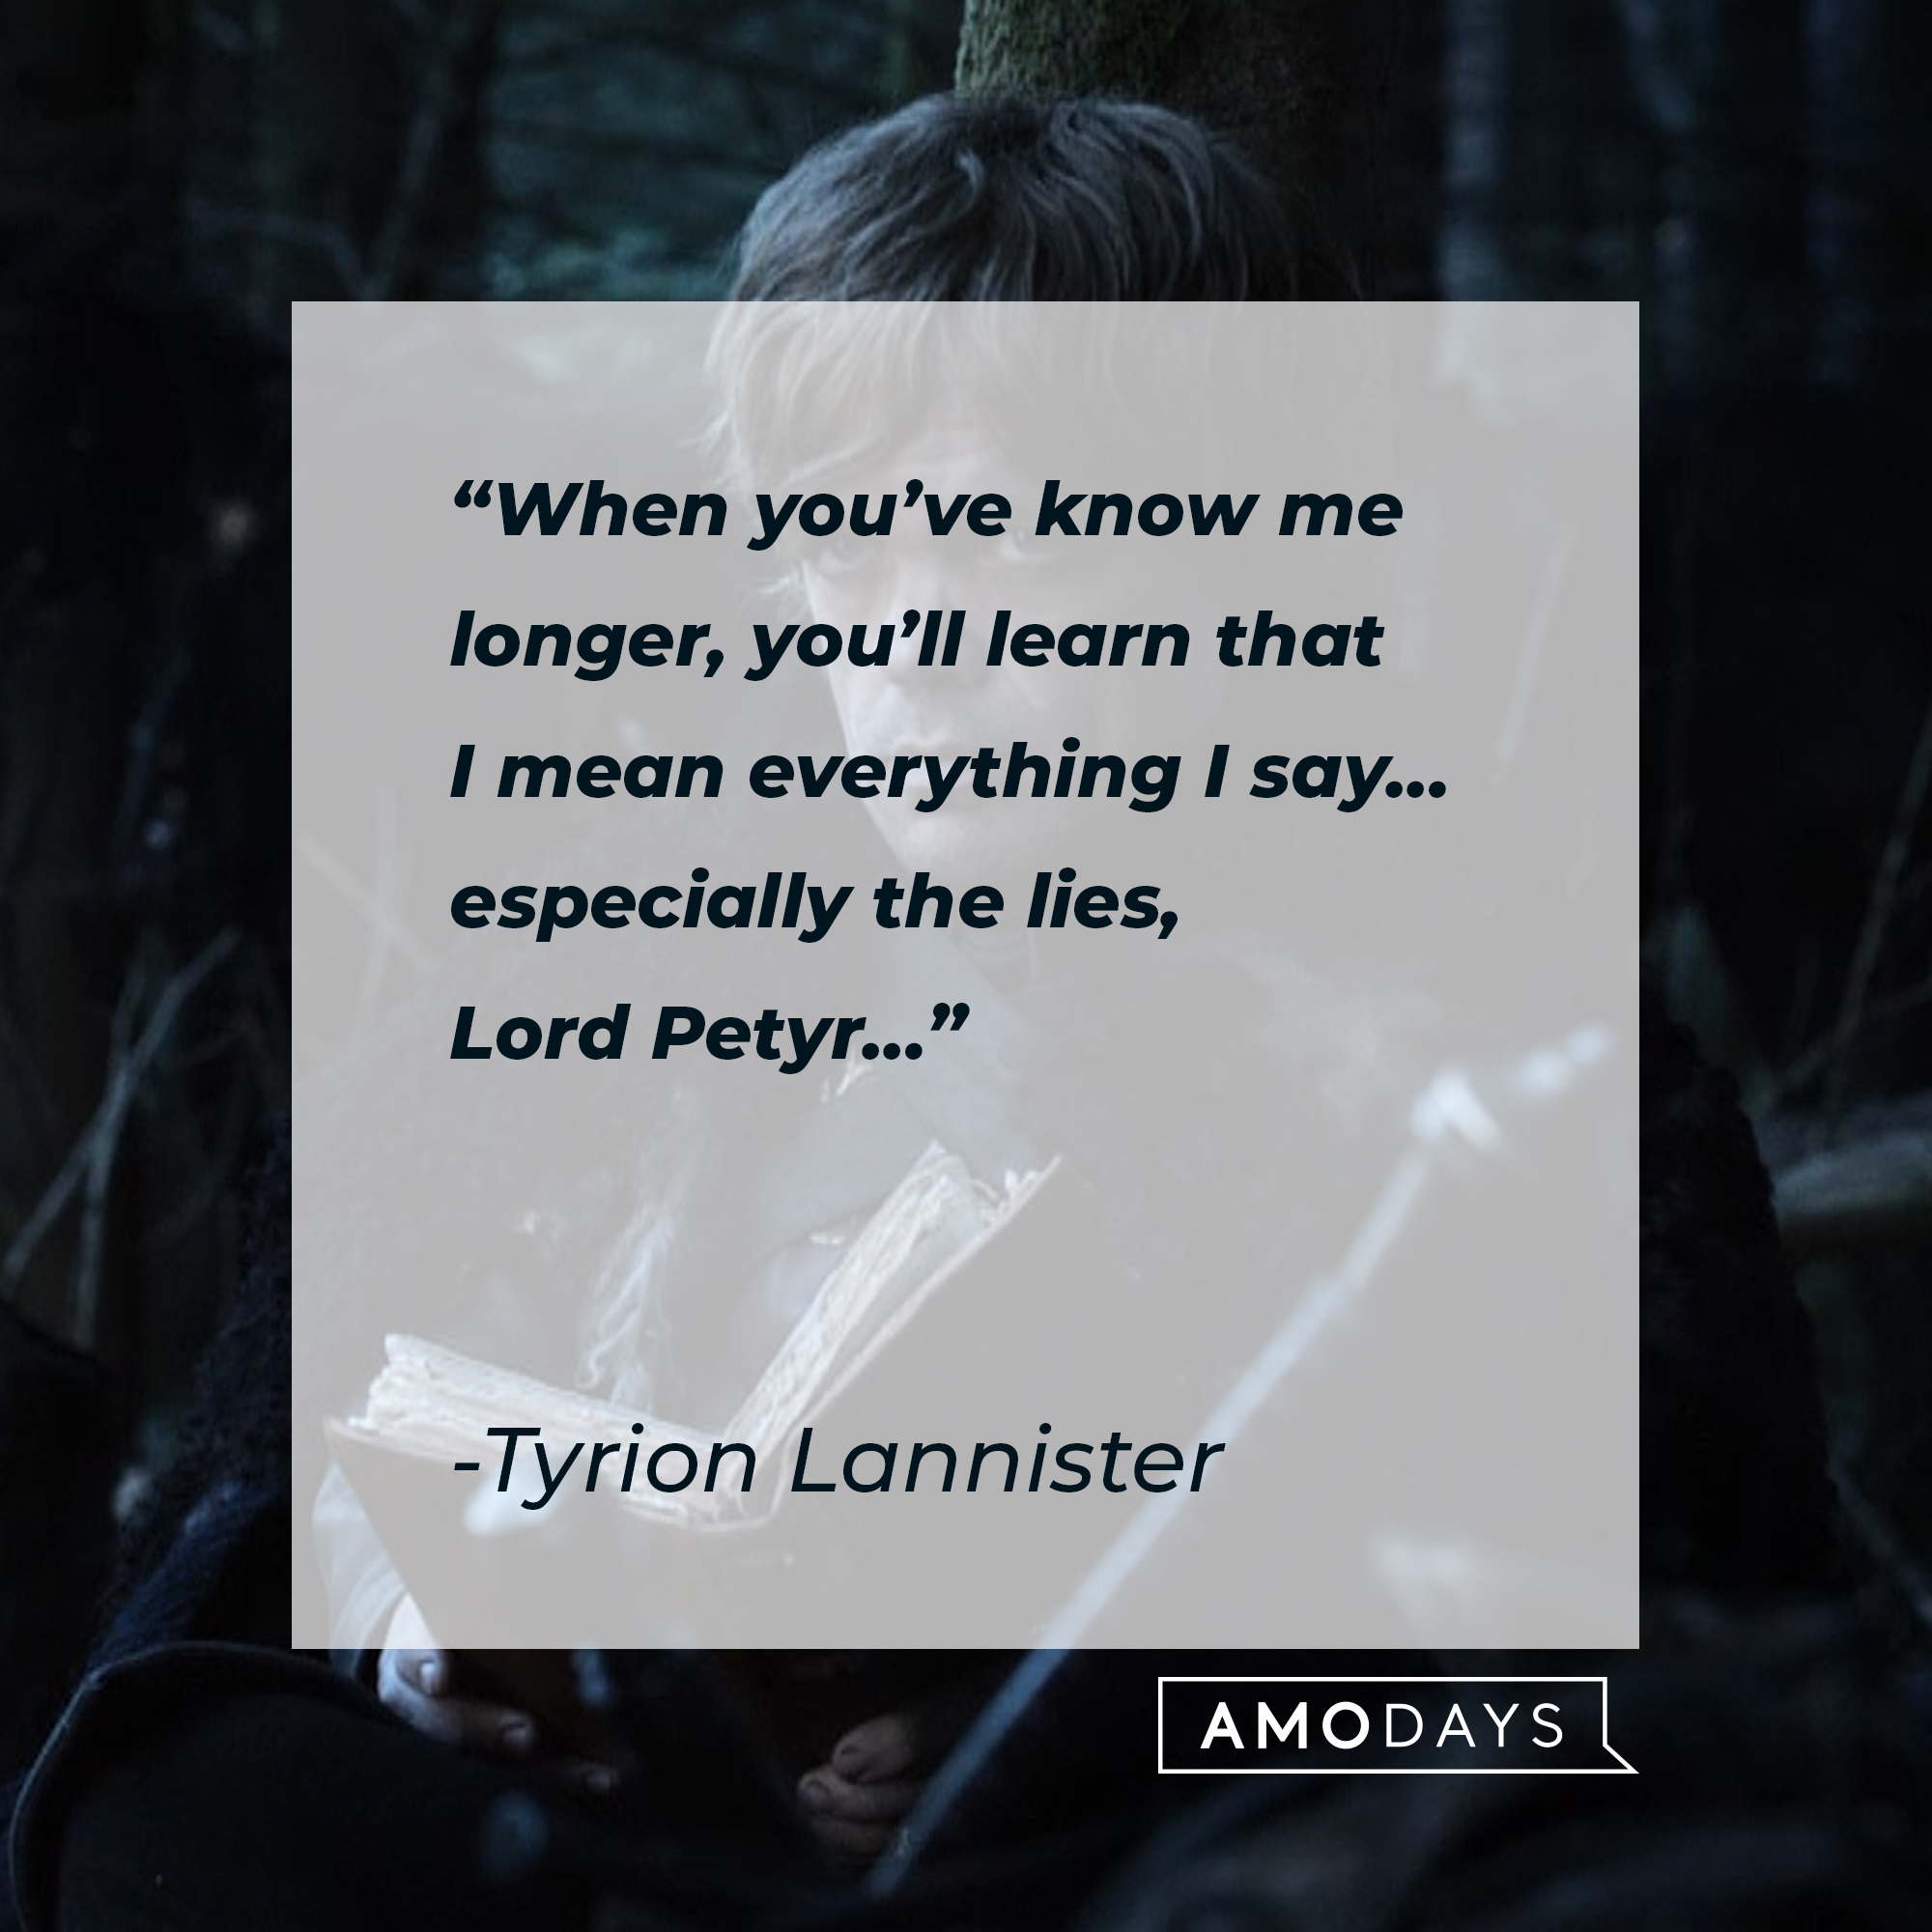 Tyrion Lannister's quote: “When you’ve know me longer, you’ll learn that I mean everything I say… especially the lies, Lord Petyr…” | Source: facebook.com/GameOfThrones